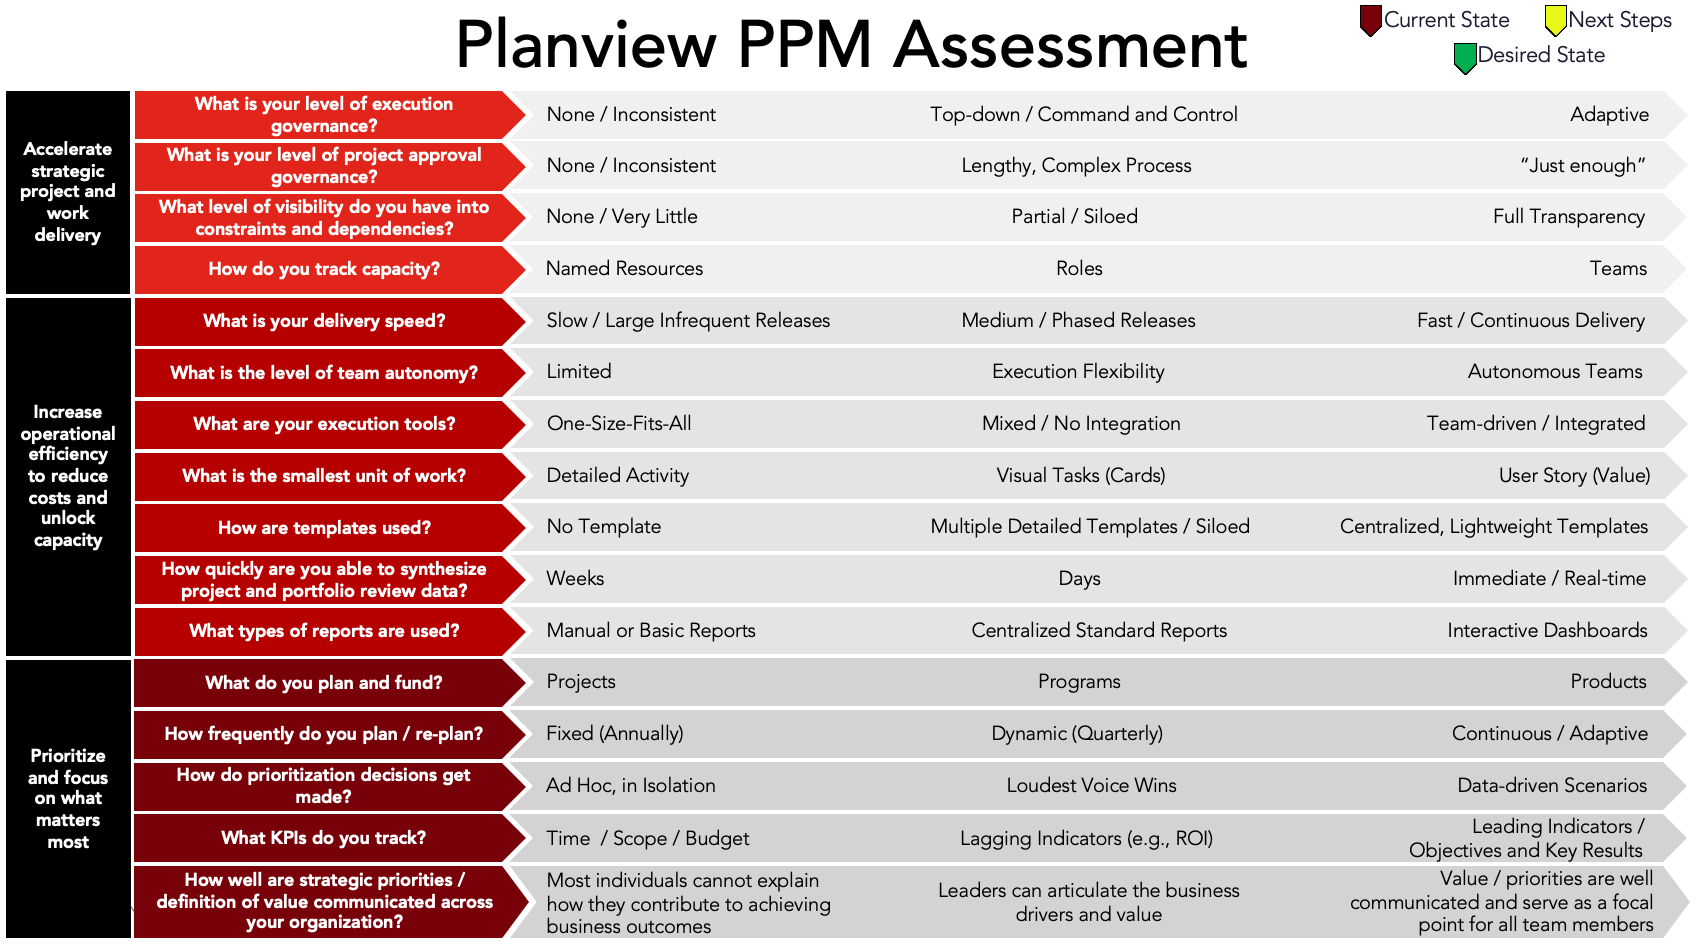 PPM Assessment.png